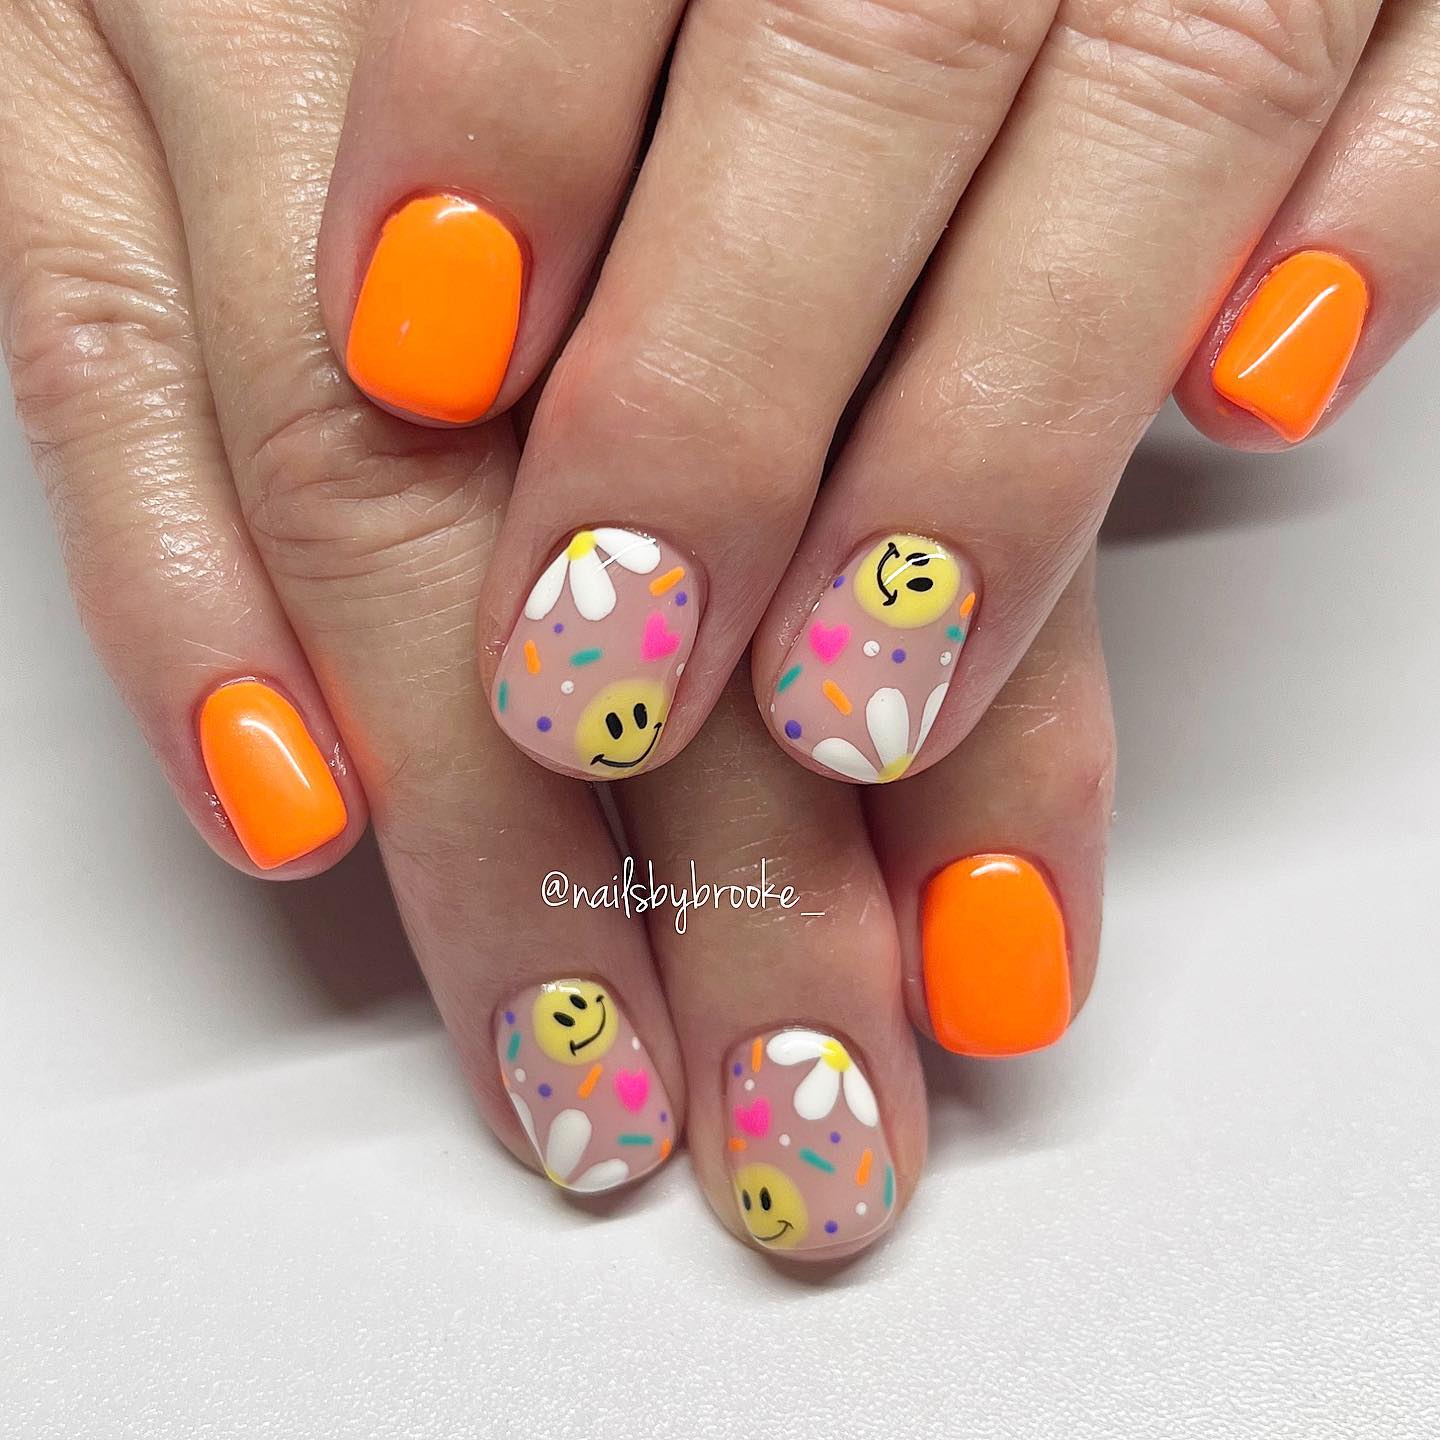 Are you looking for a bright, happy and fun daisy nail design? The example above is the nails you will adore.